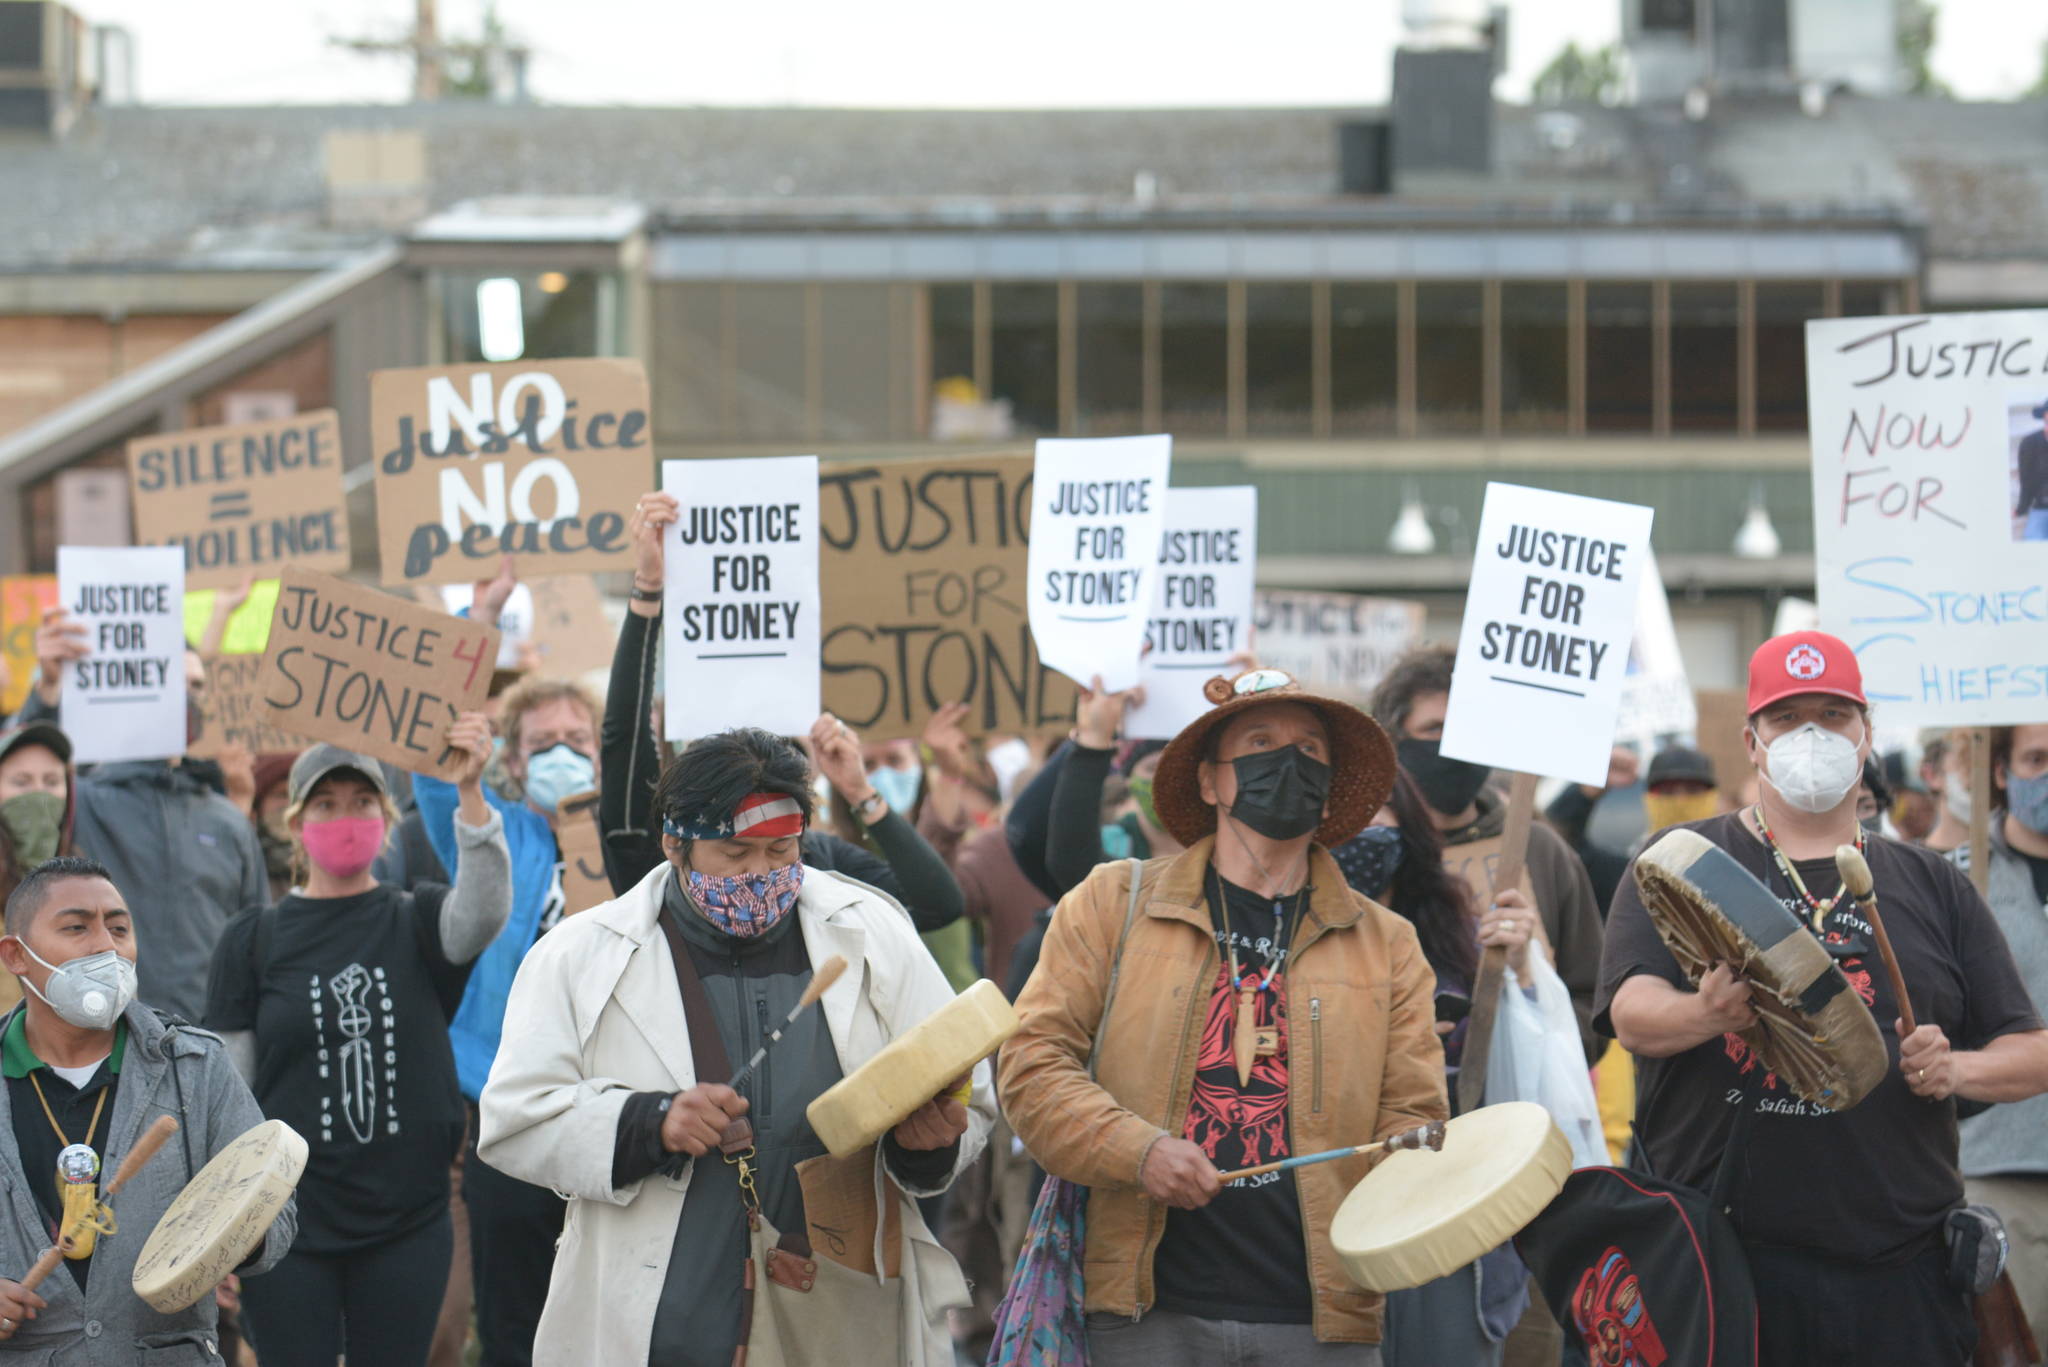 Demonstrators gather in downtown Poulsbo on July 3, the one year anniversary after the fatal police shooting of Stonechild Chiefstick. Photo Courtesy Suquamish Tribe